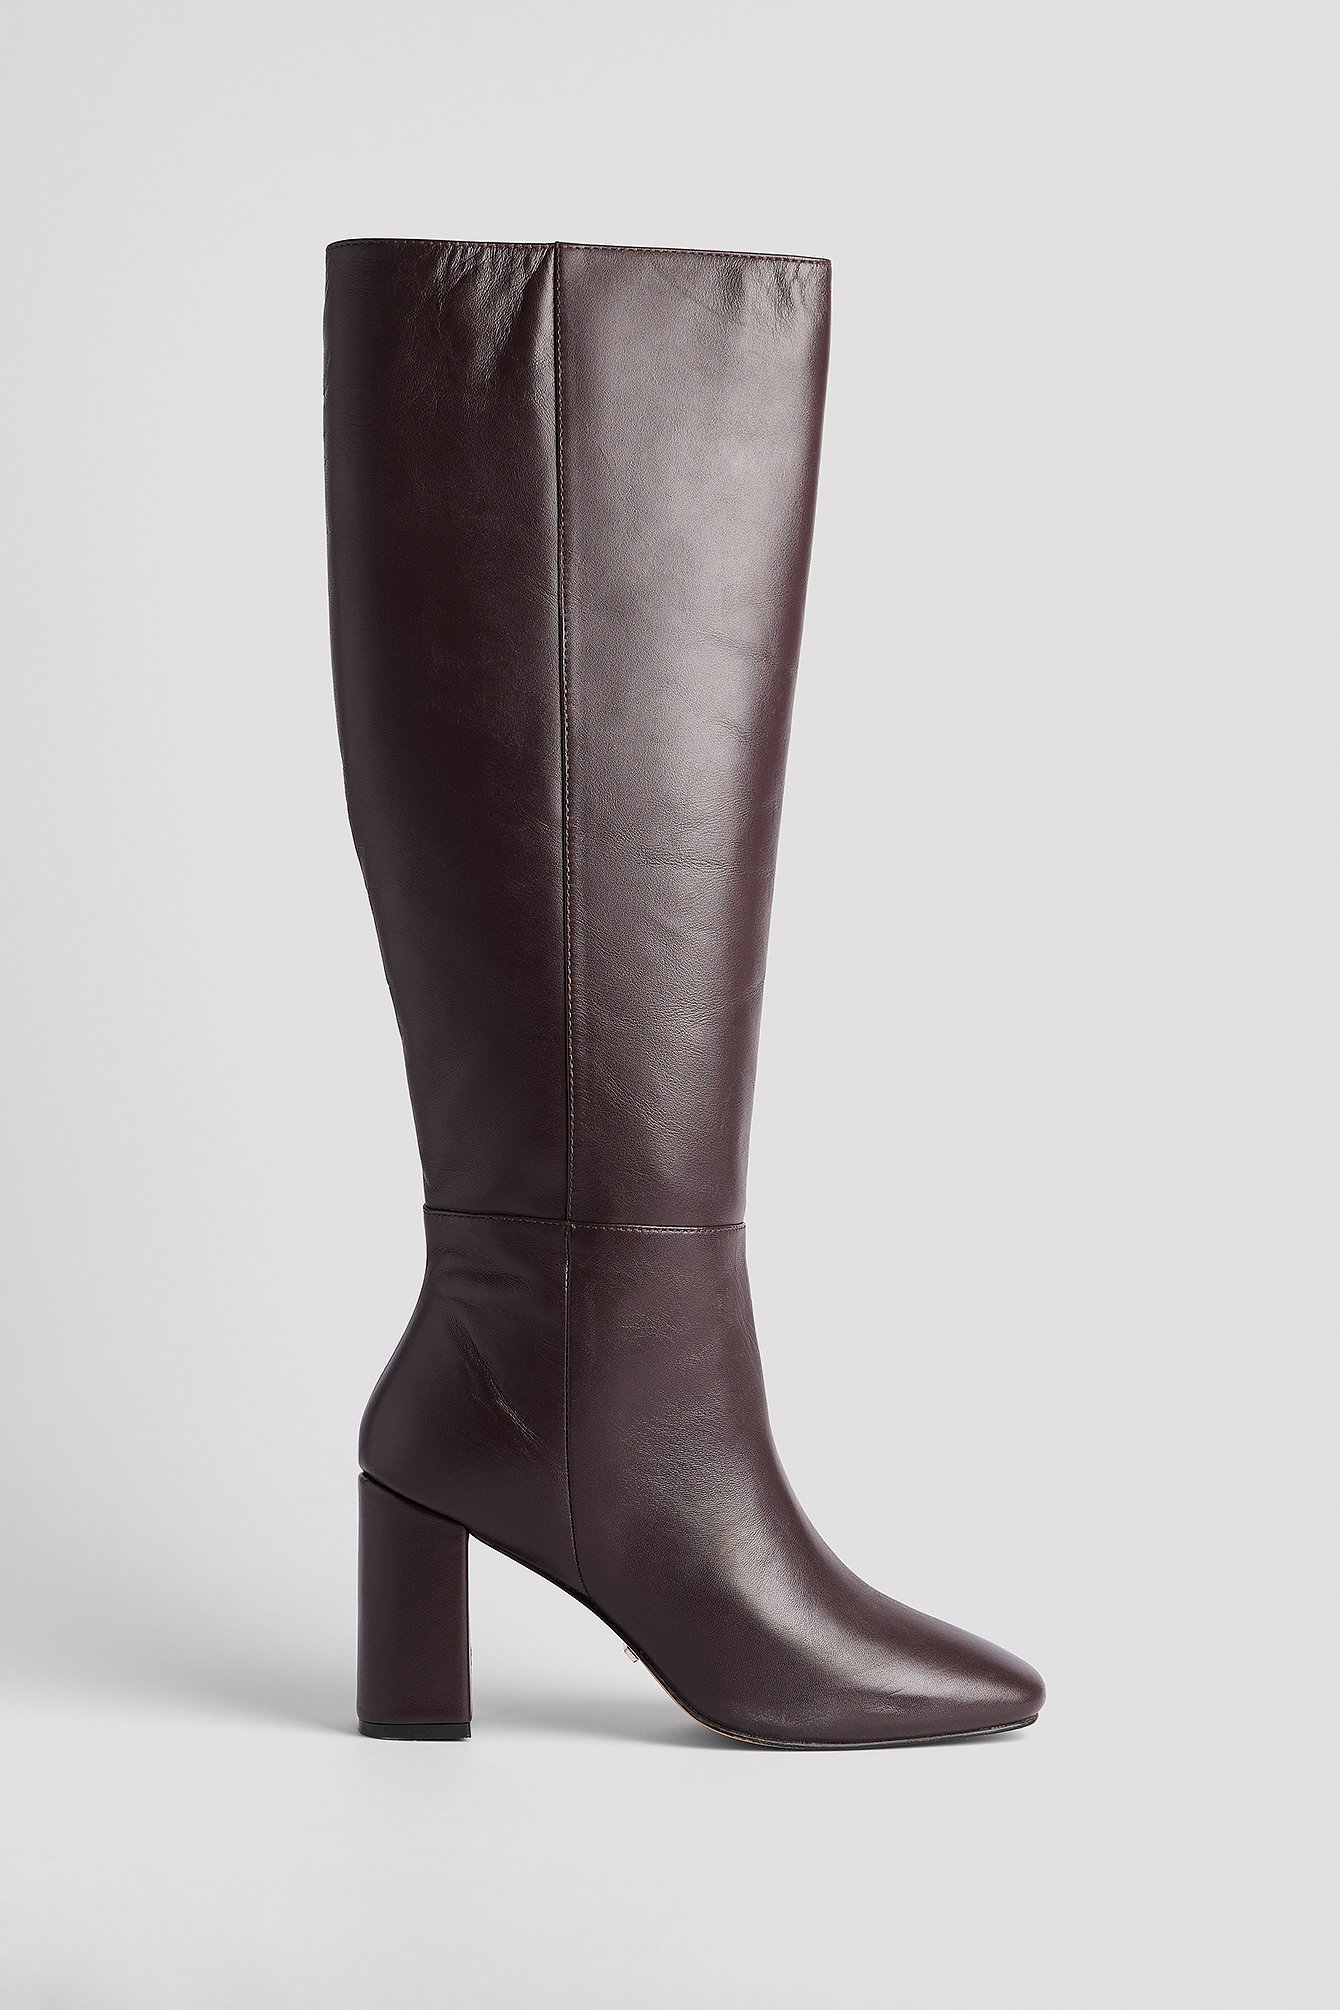 NA-KD Shoes Leather Knee High Boots - Brown